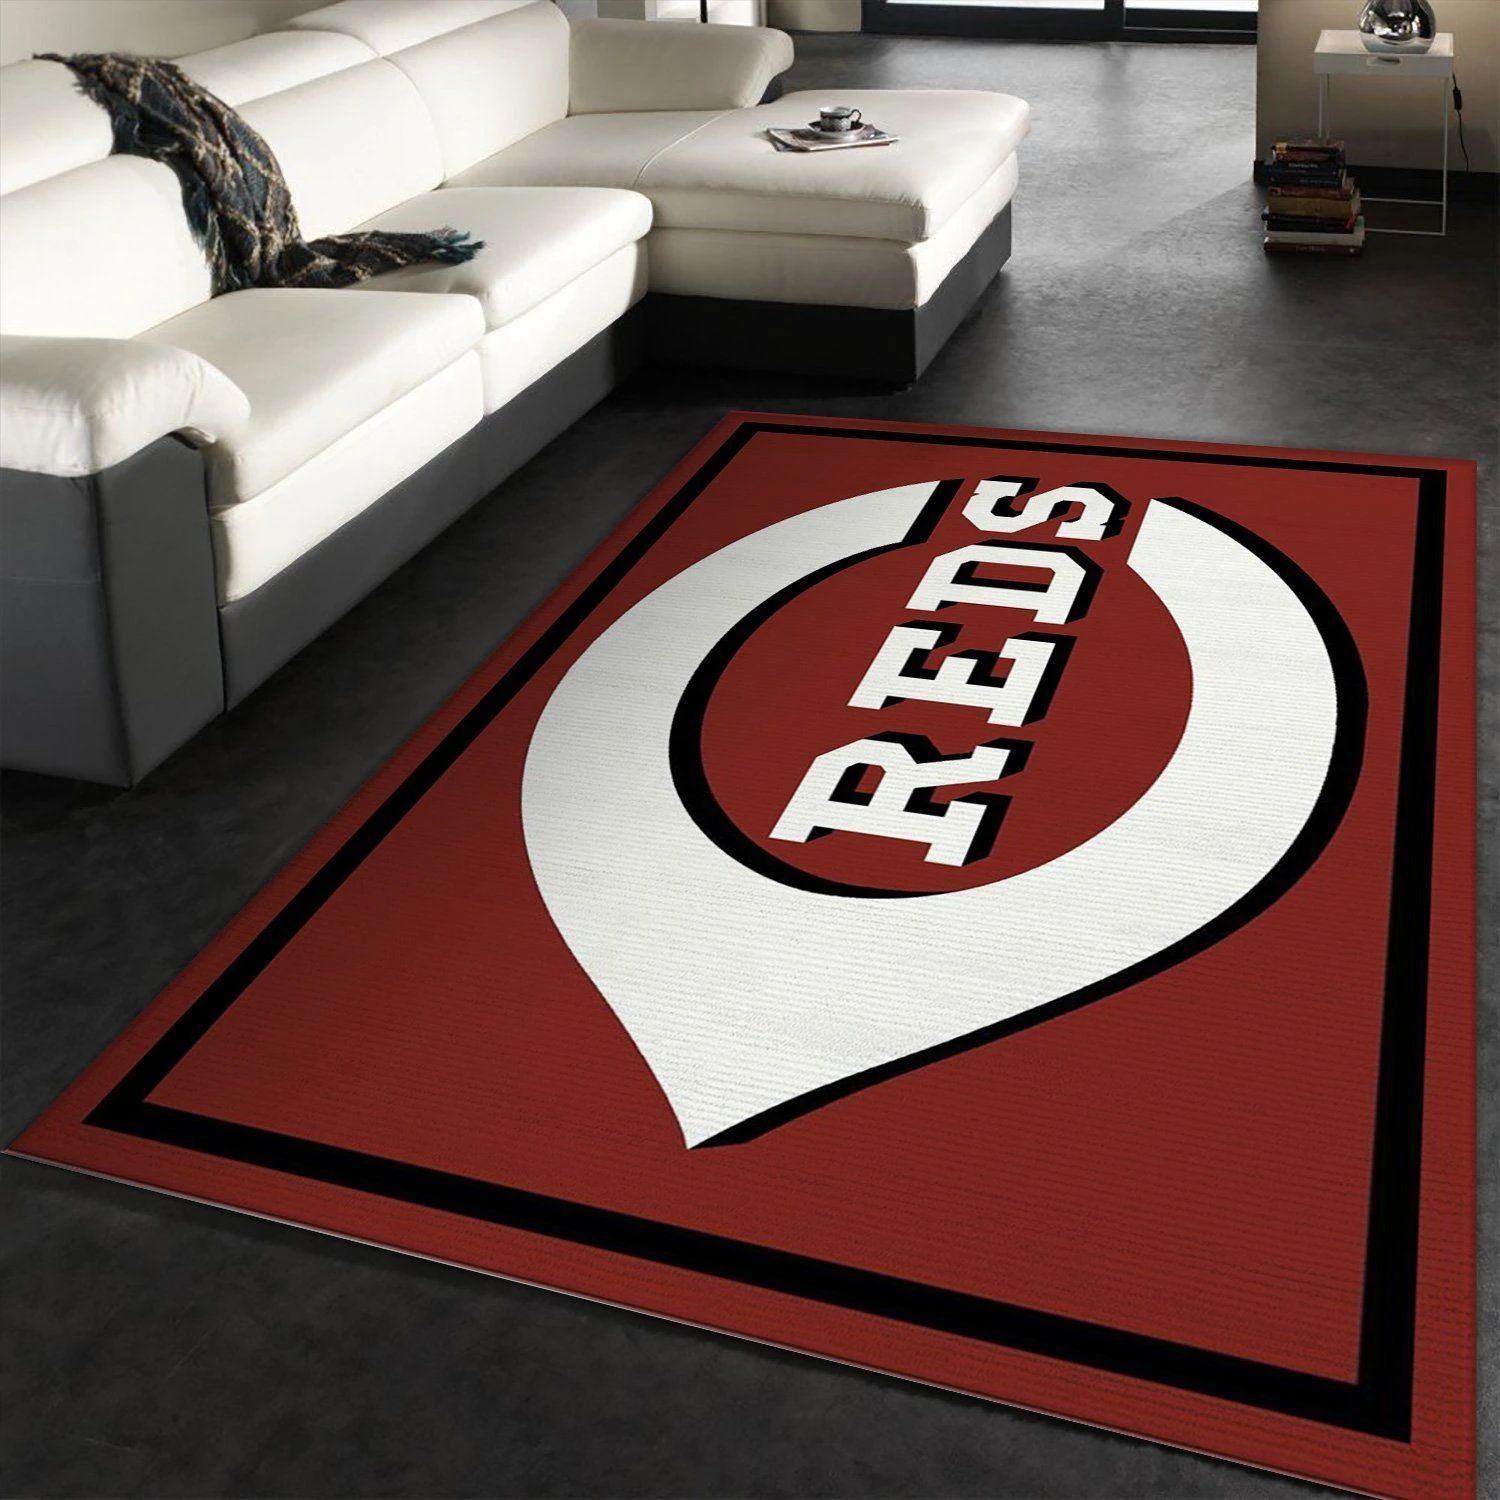 Cincinnati Reds Imperial Spirit MLB Rug Area Rug, Living room and bedroom Rug, Family Gift US Decor - Indoor Outdoor Rugs